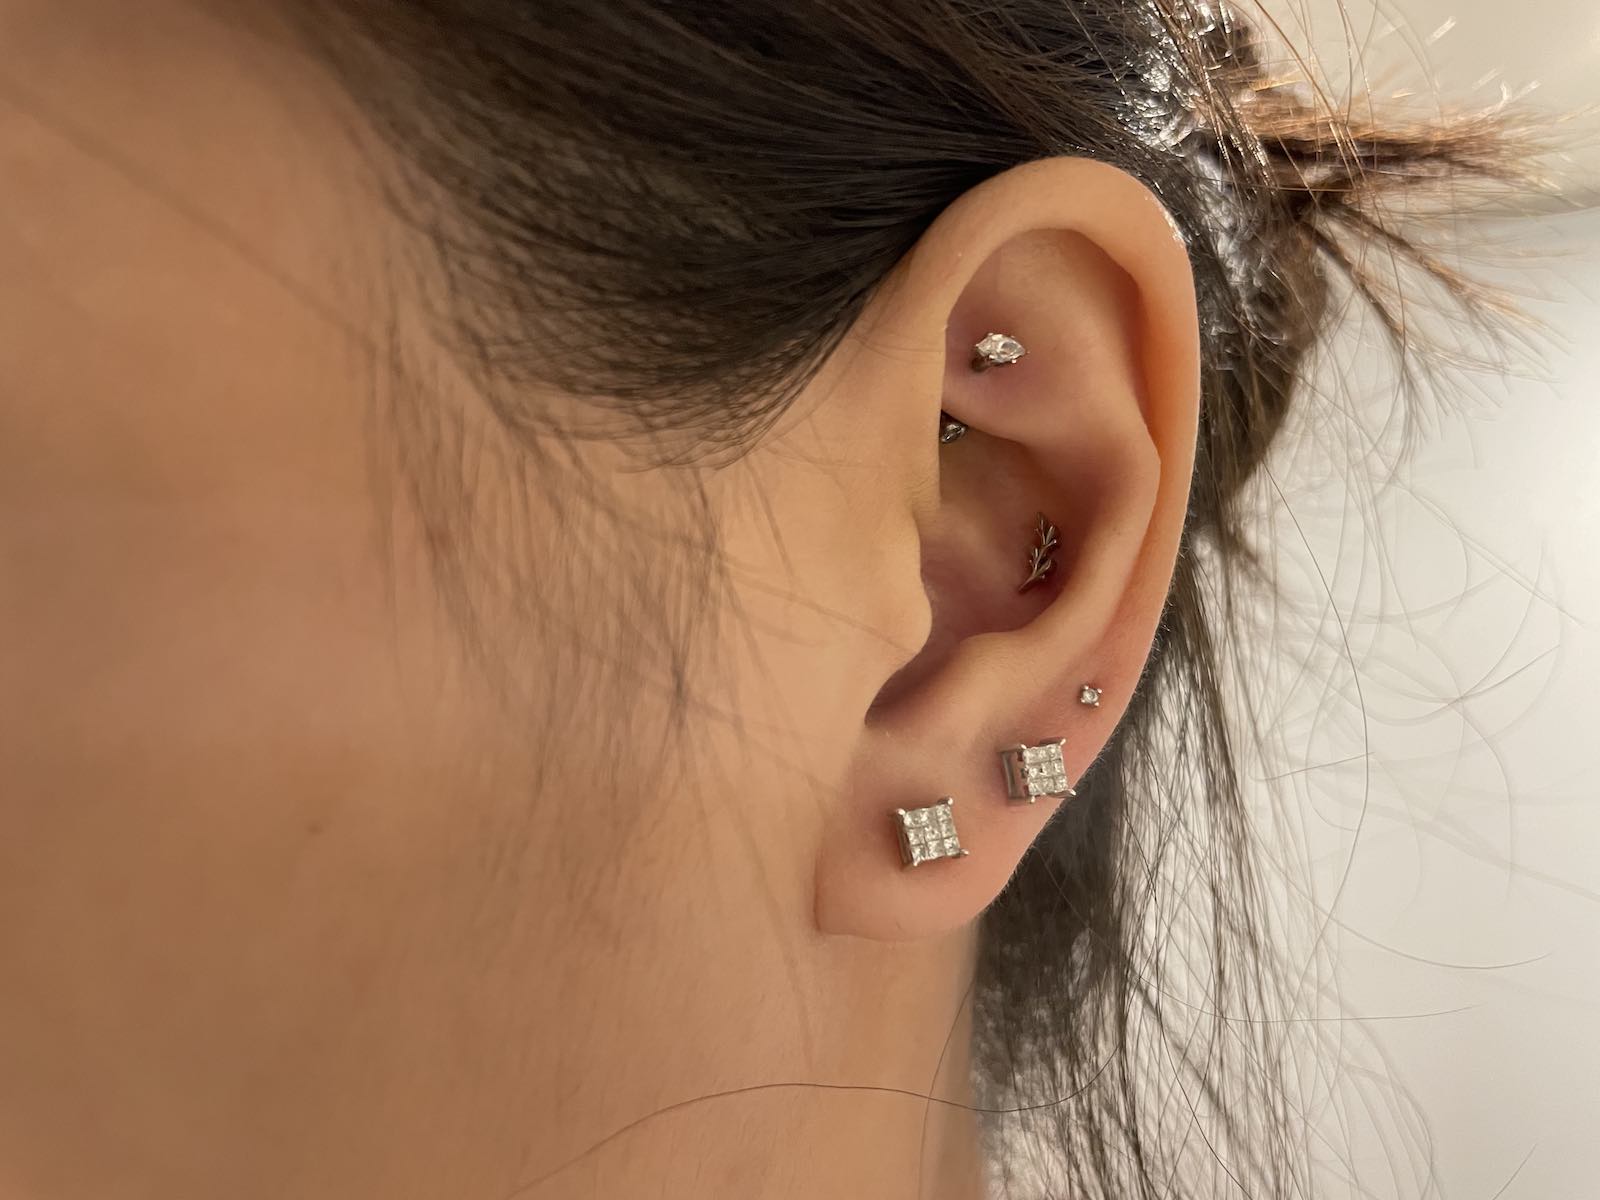 A close-up of a woman’s ear. She has three lobe piercings, a rook piercing and a conch piercing. The lobes have studs in them with clear gems, the conch piercing has a leaf-shaped stud, and the rook has a stud and a crystal